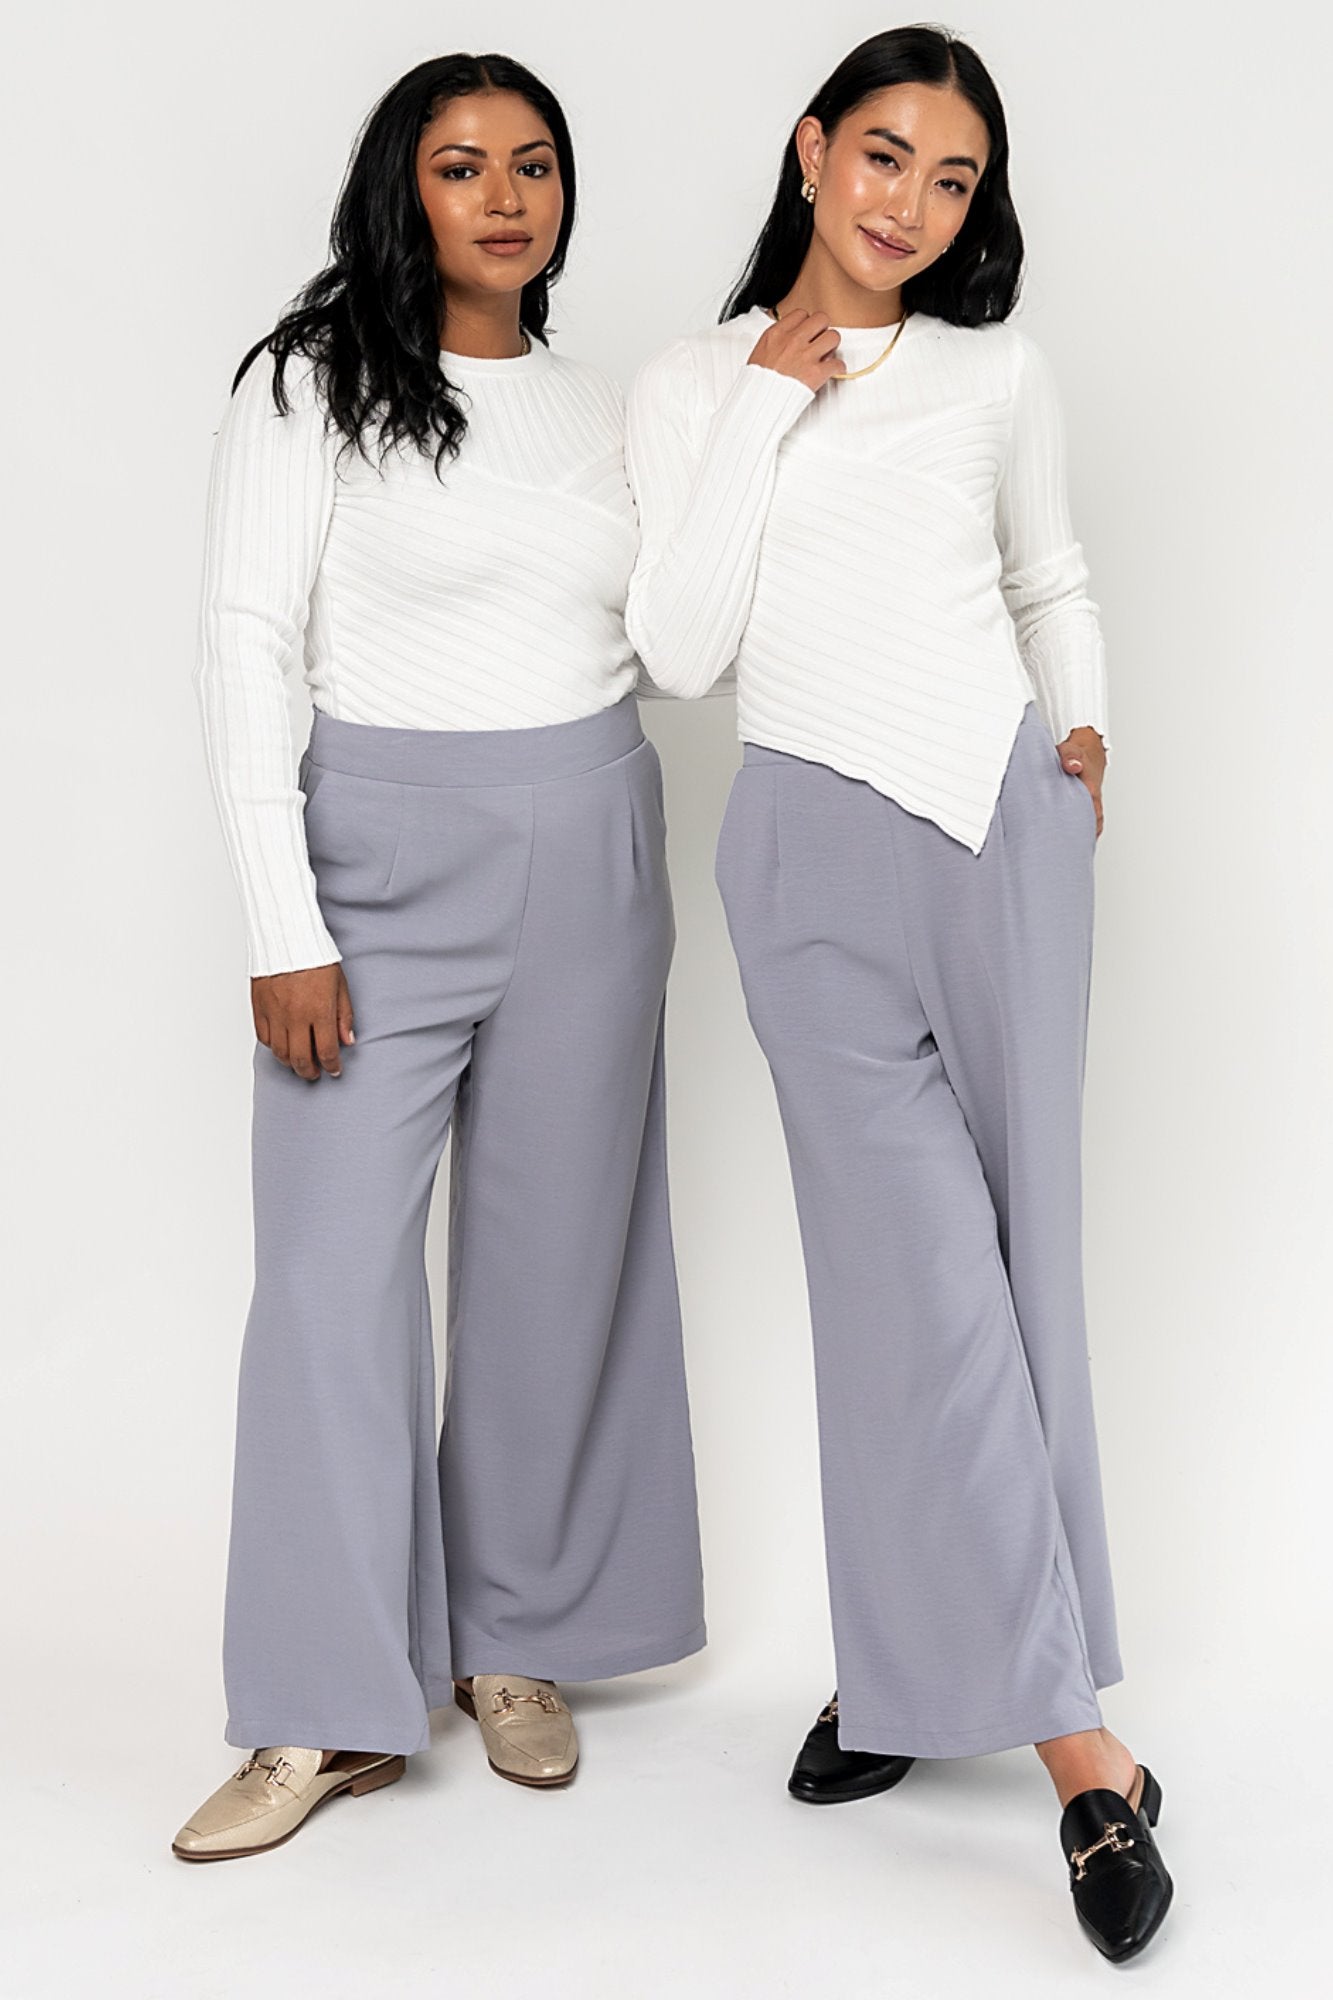 Jovie Pant in Grey (Small-XL) Holley Girl 